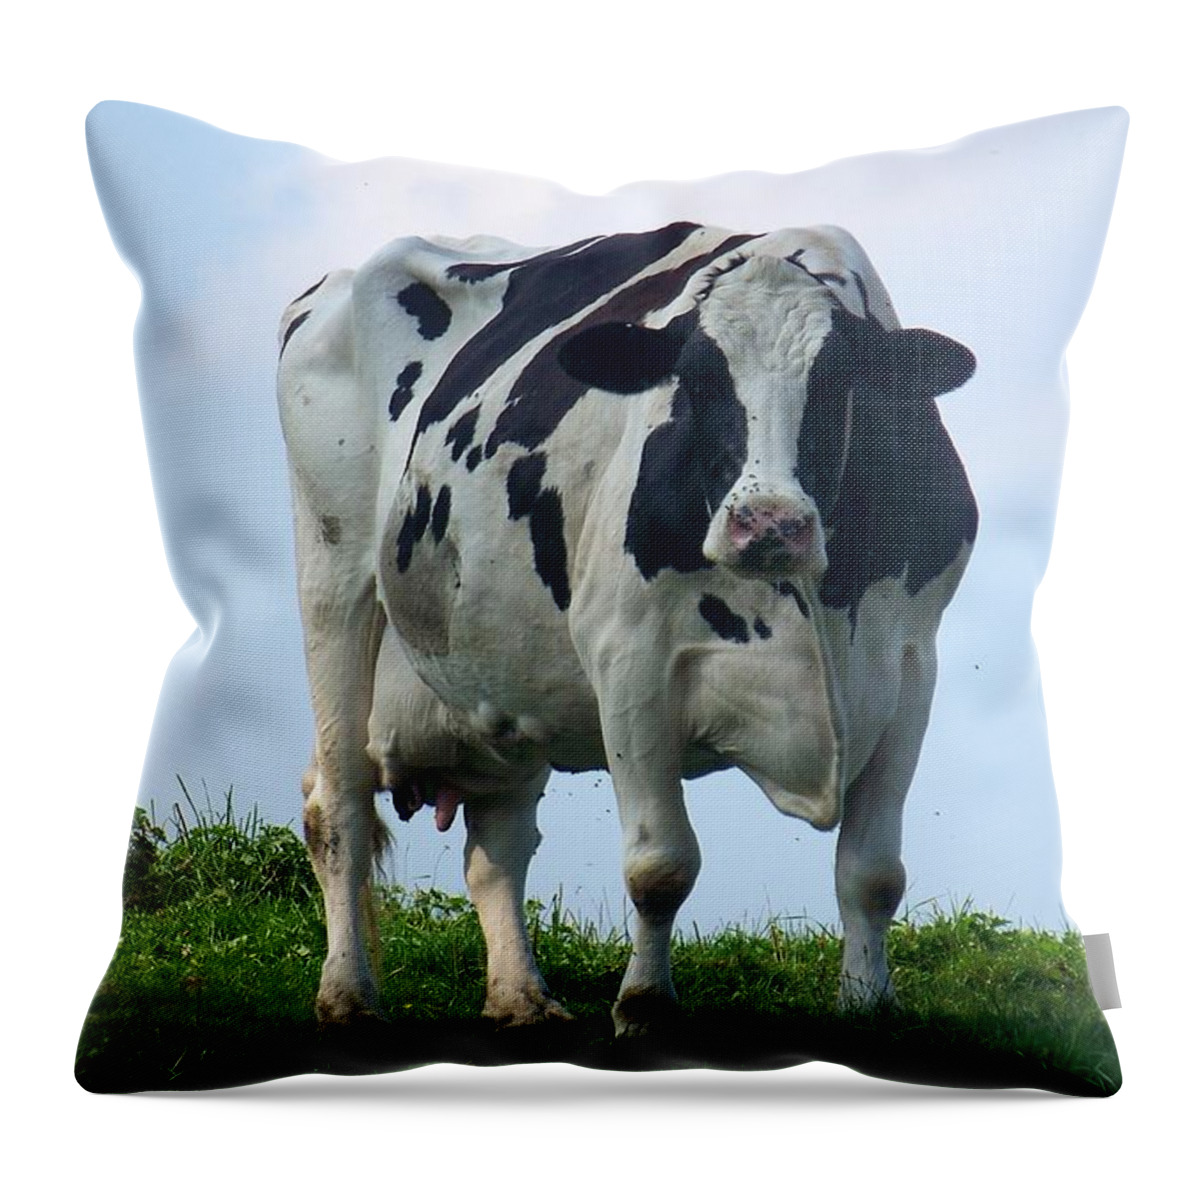 Cows Throw Pillow featuring the photograph Vermont Dairy Cow by Eunice Miller